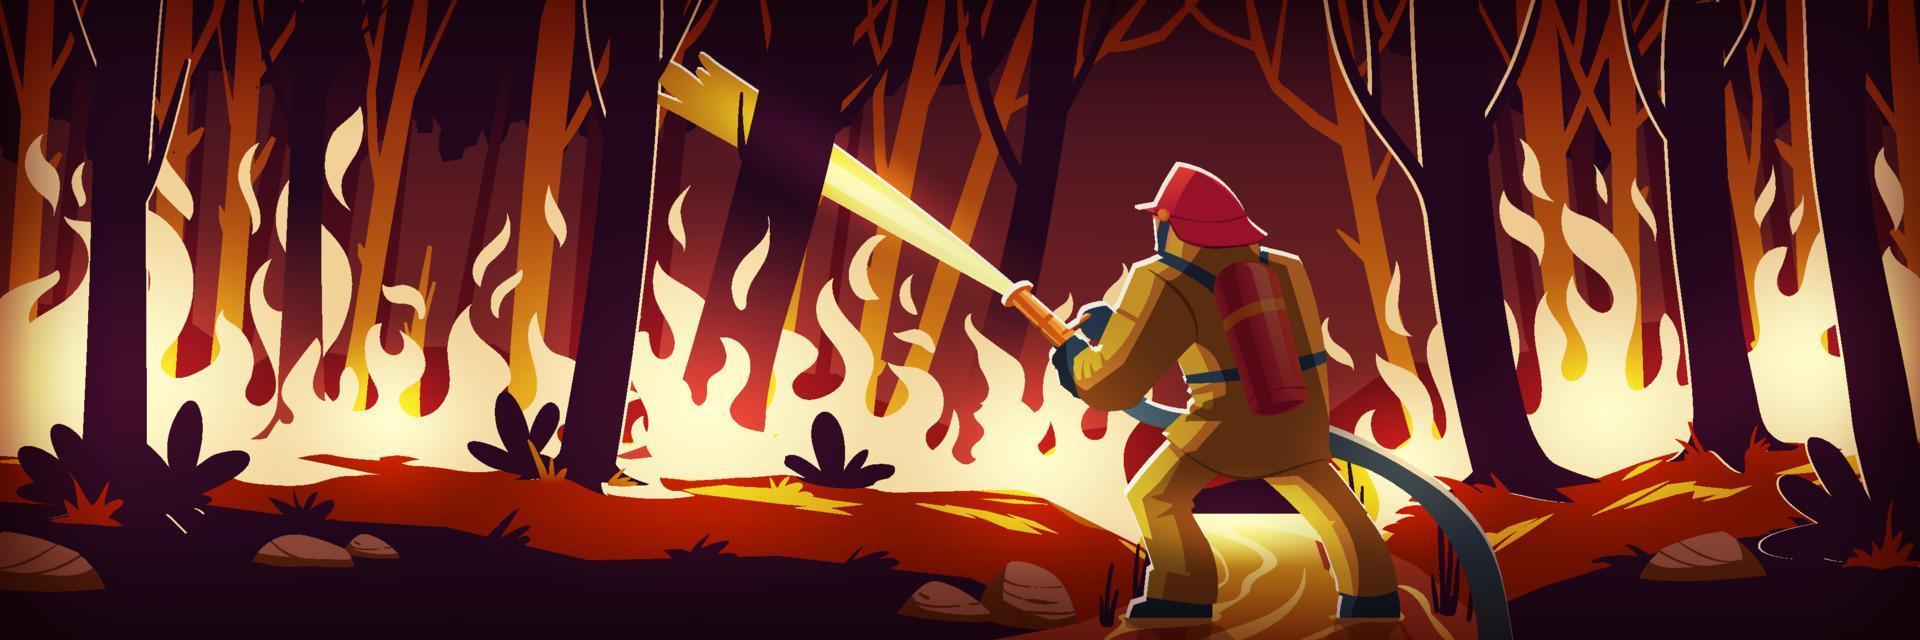 Fireman fight with fire in forest, catastrophe vector